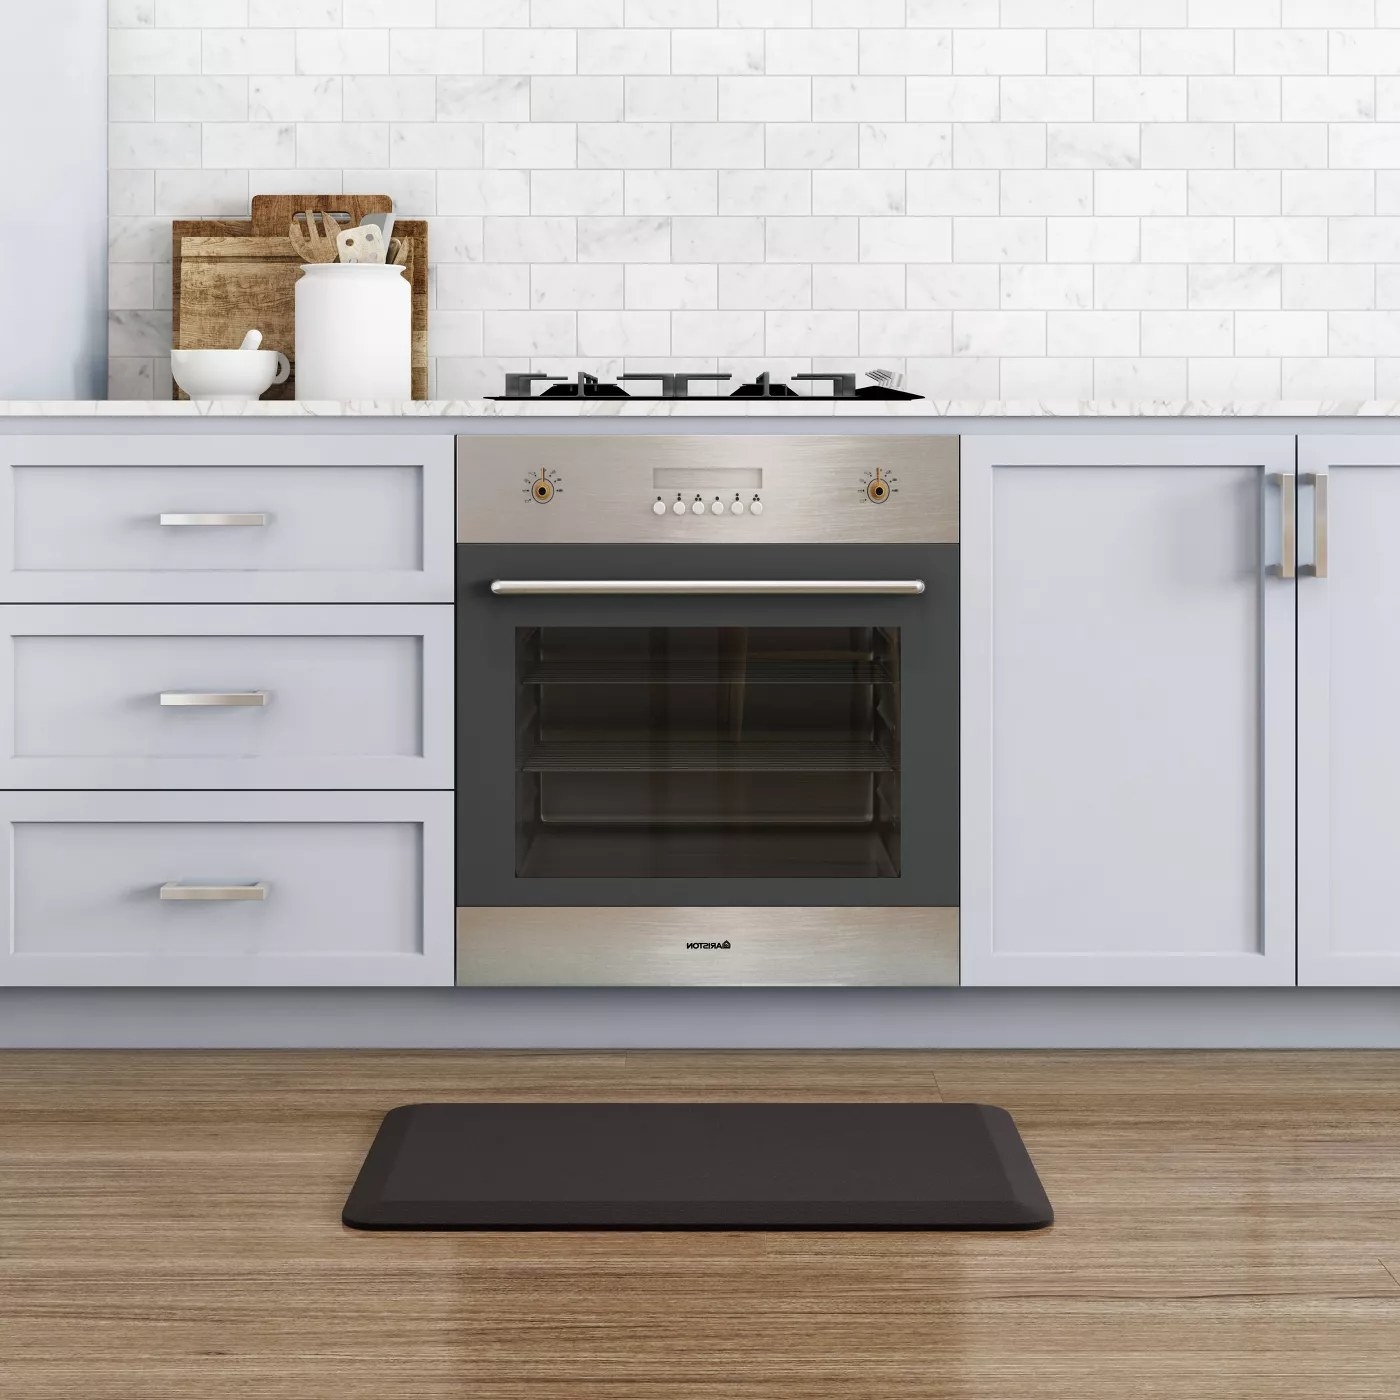 A black mat placed in front of a stove